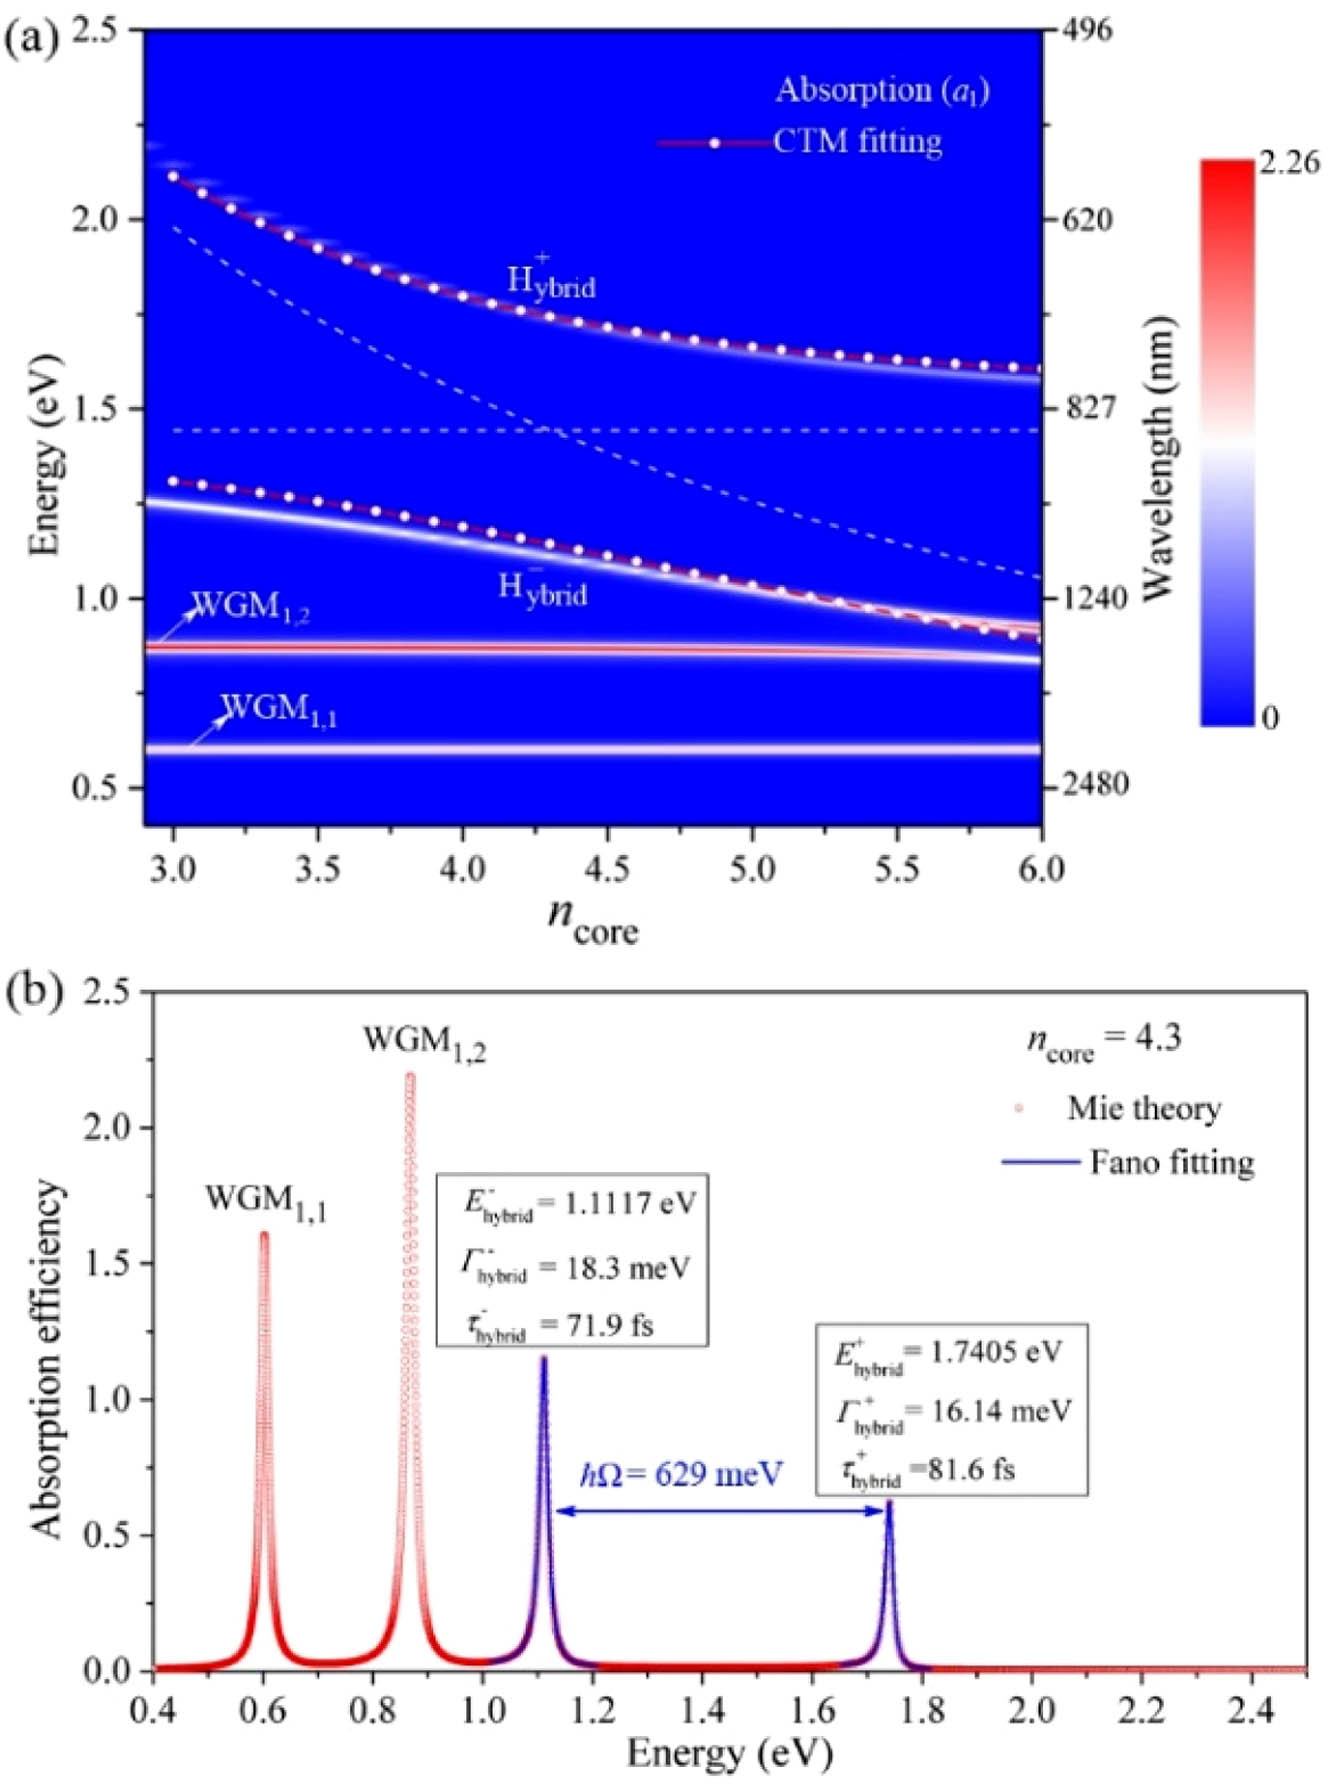 (a) Absorption efficiency spectra (a1) of a spherical HMM cavity (rcore=50 nm, s=15 nm, d=20 nm, and nd=1.4) as a function of the dielectric core index (ncore). The two red lines with circles present the dispersions of two hybrid modes predicted by the CTM fitting. The dashed white horizontal and oblique lines represent the resonant energy (left y axis) and wavelength (right y axis) of the uncoupled WGM1,3 and TM1,1 mode, respectively. (b) The absorption efficiency spectrum of the spherical HMM cavity with a dielectric core index of ncore=4.3 (ETM1,1=EWGM1,3). The blue lines are the Fano fitting results for the calculated absorption peaks.